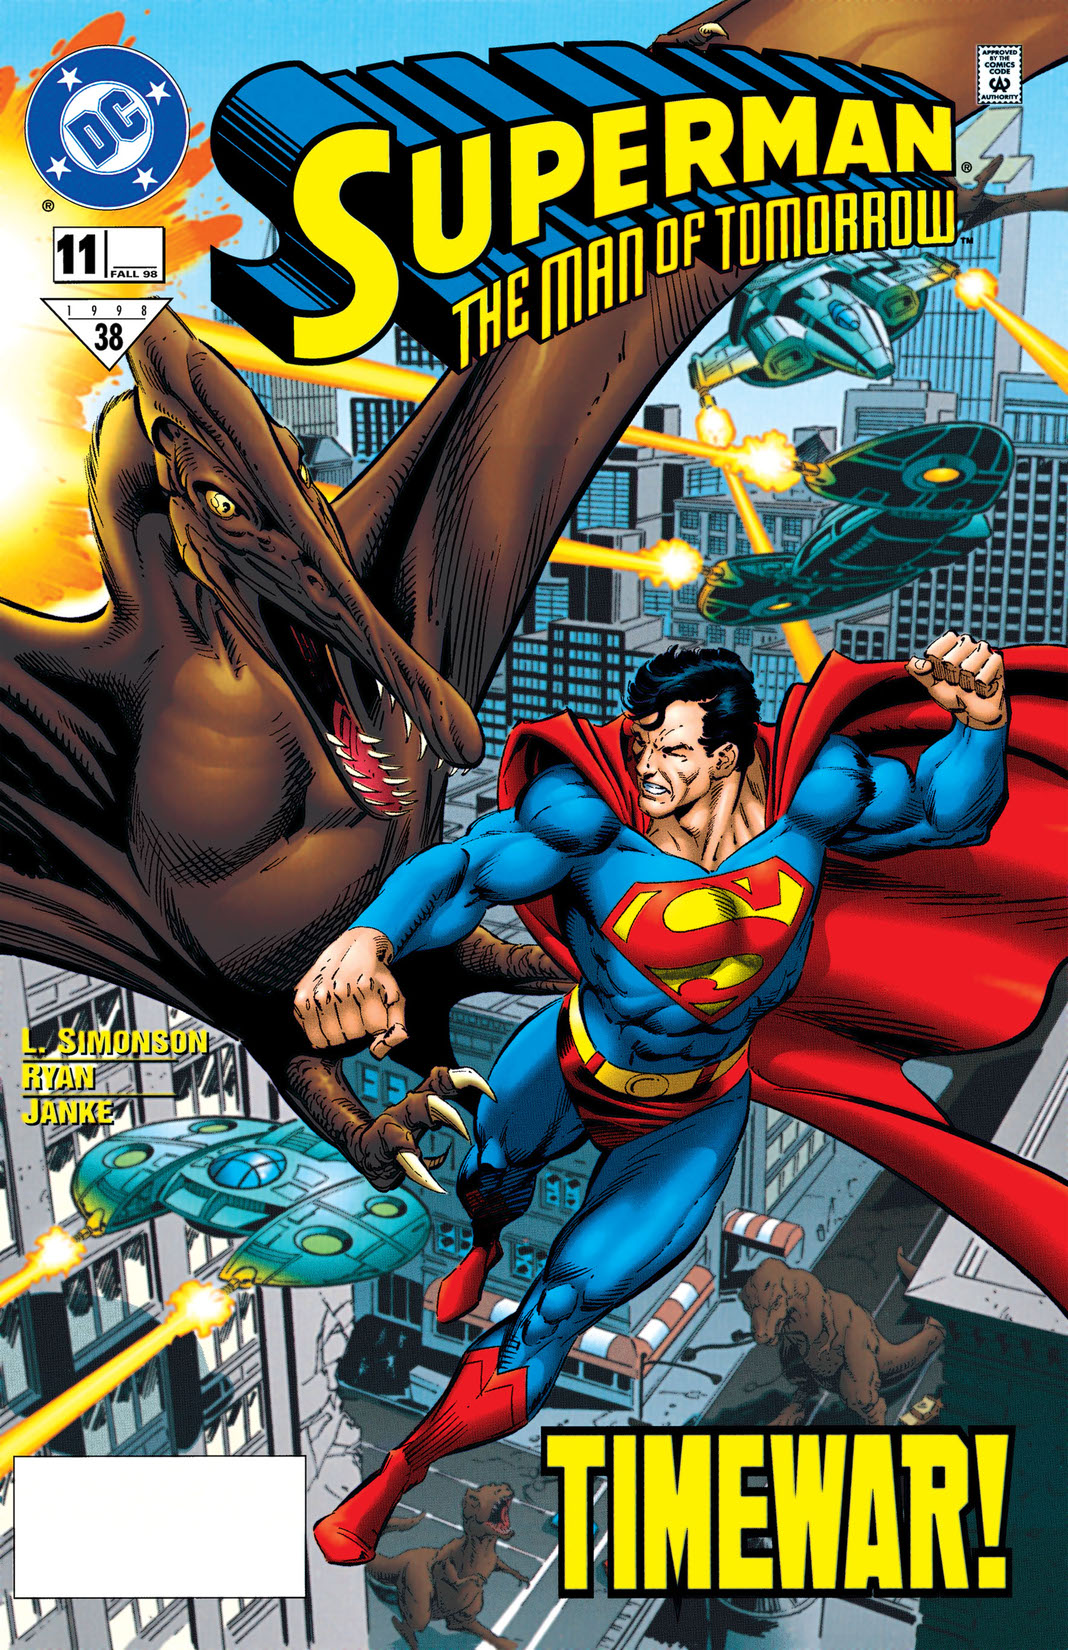 Superman: The Man of Tomorrow #11 preview images